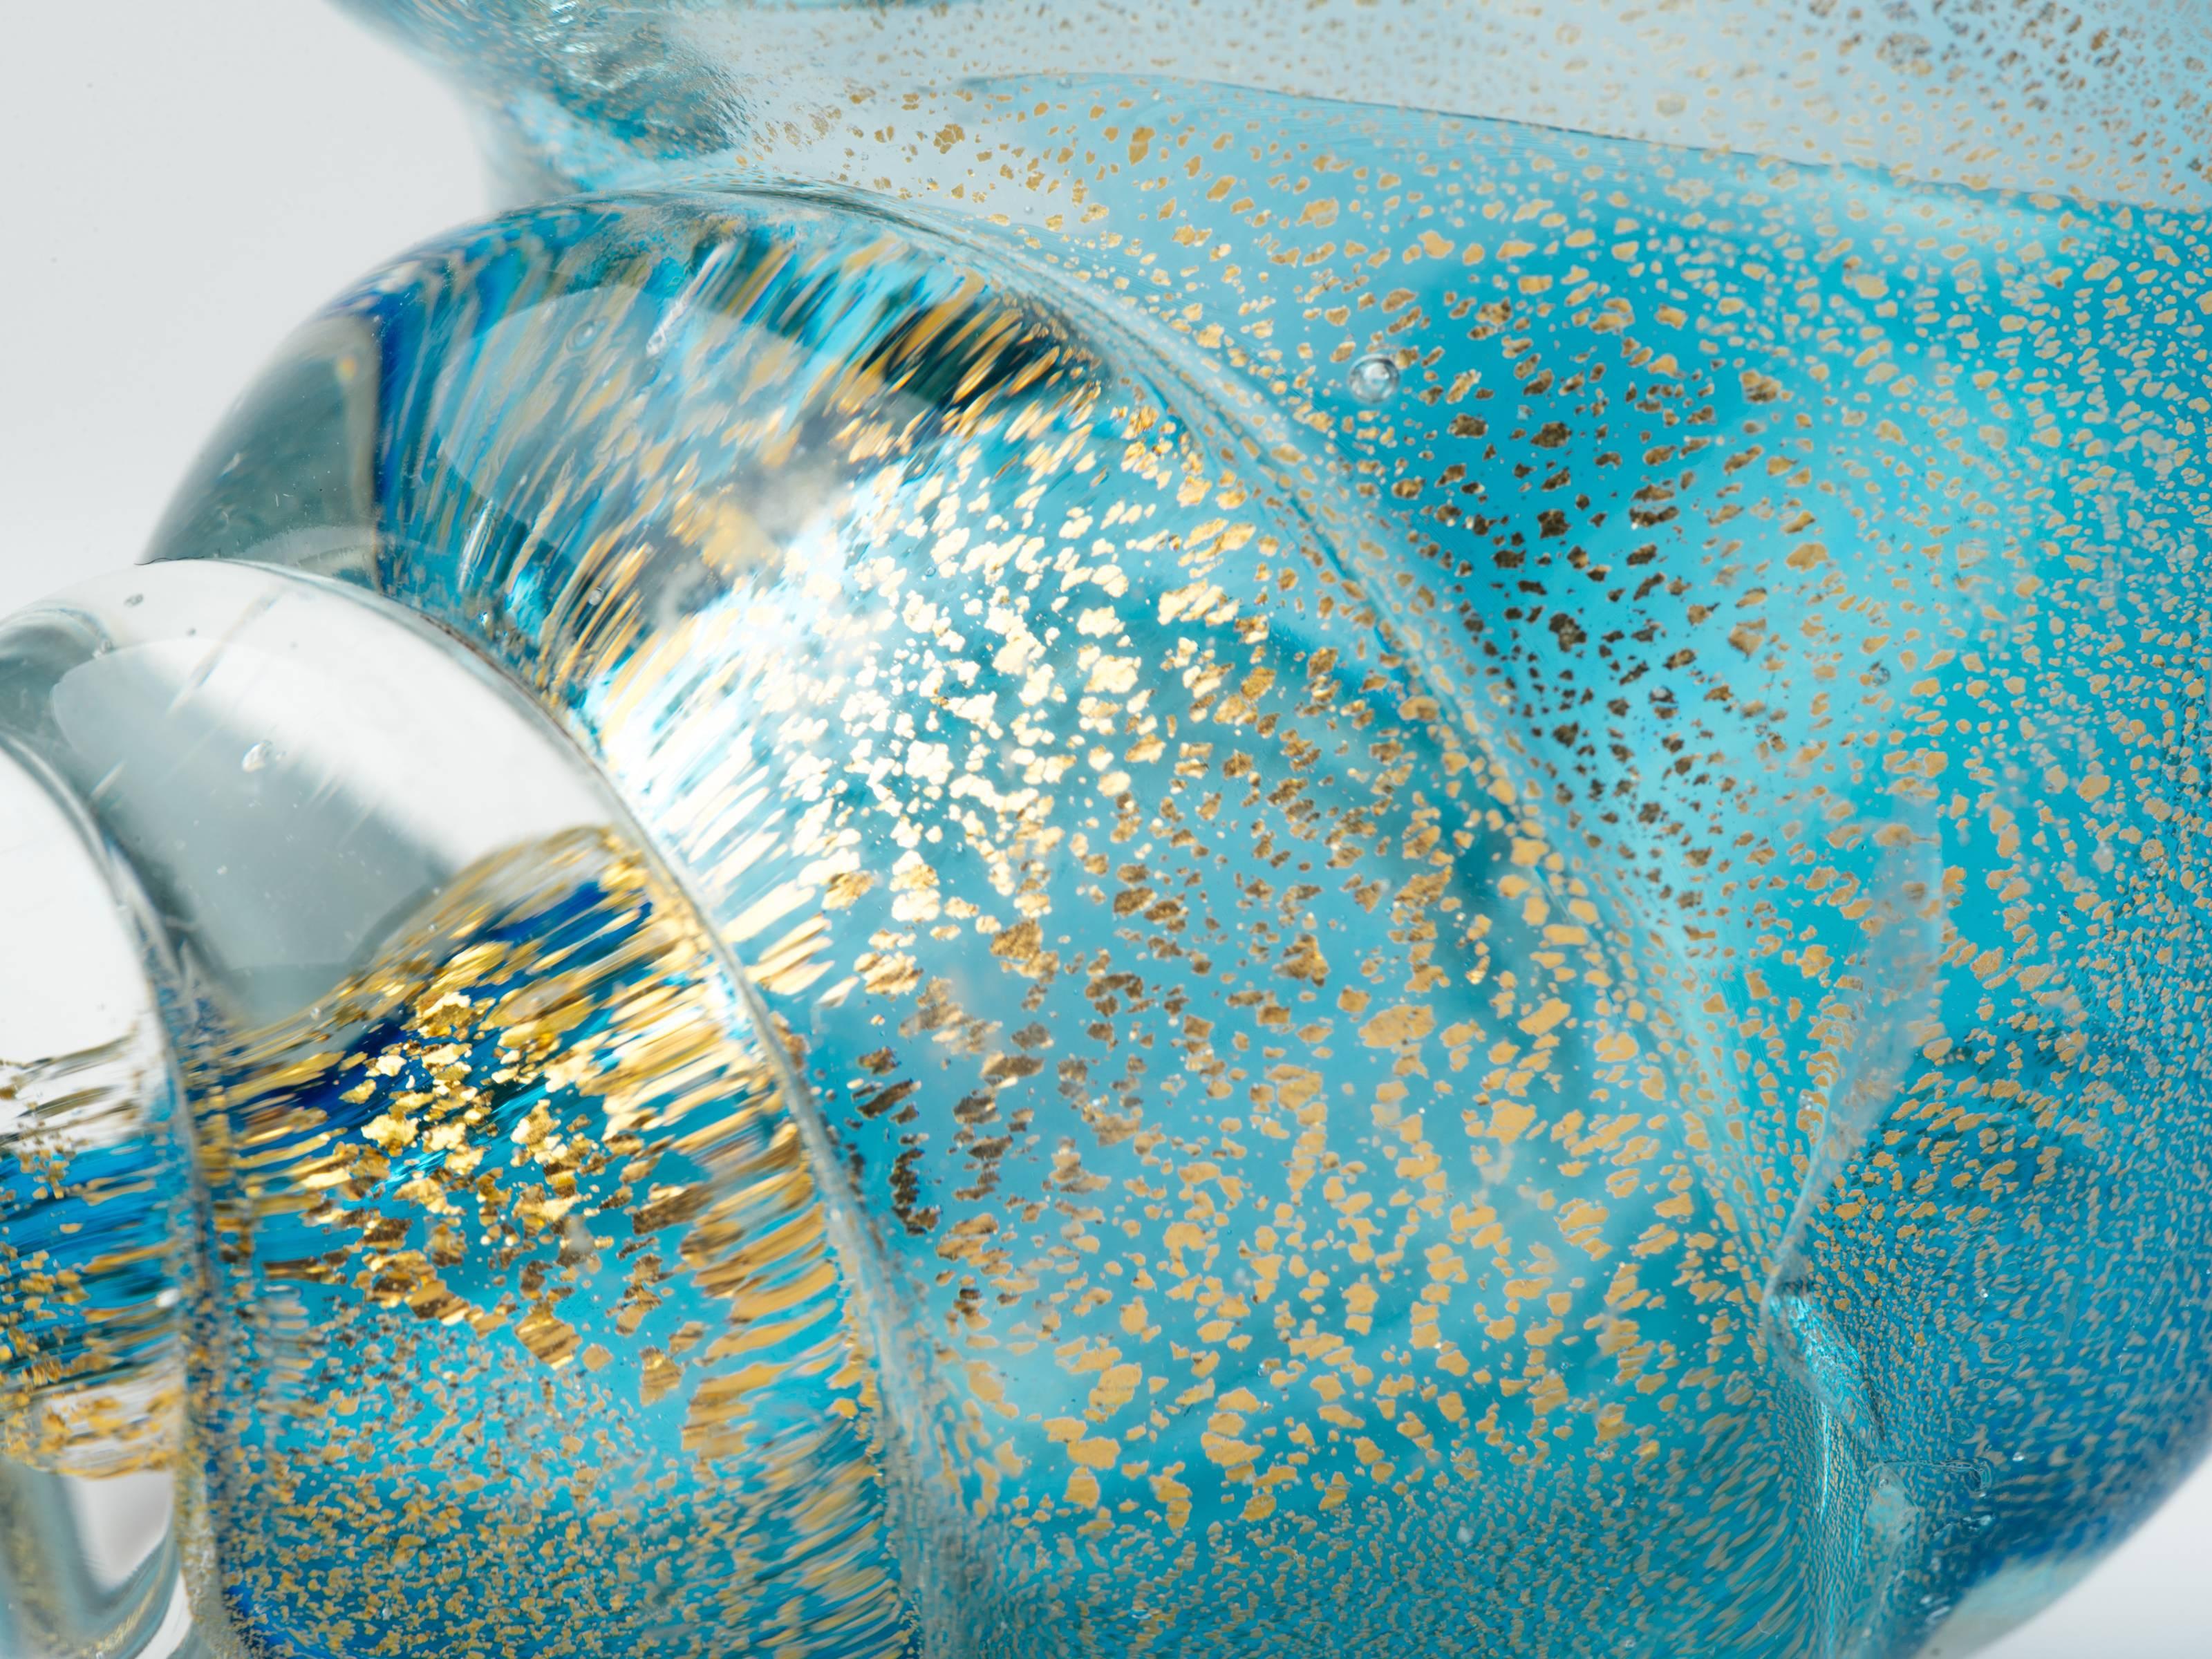 Gold Leaf Pair of Exquisite Aqua and Gold Murano Bowls by Alfredo Barbini